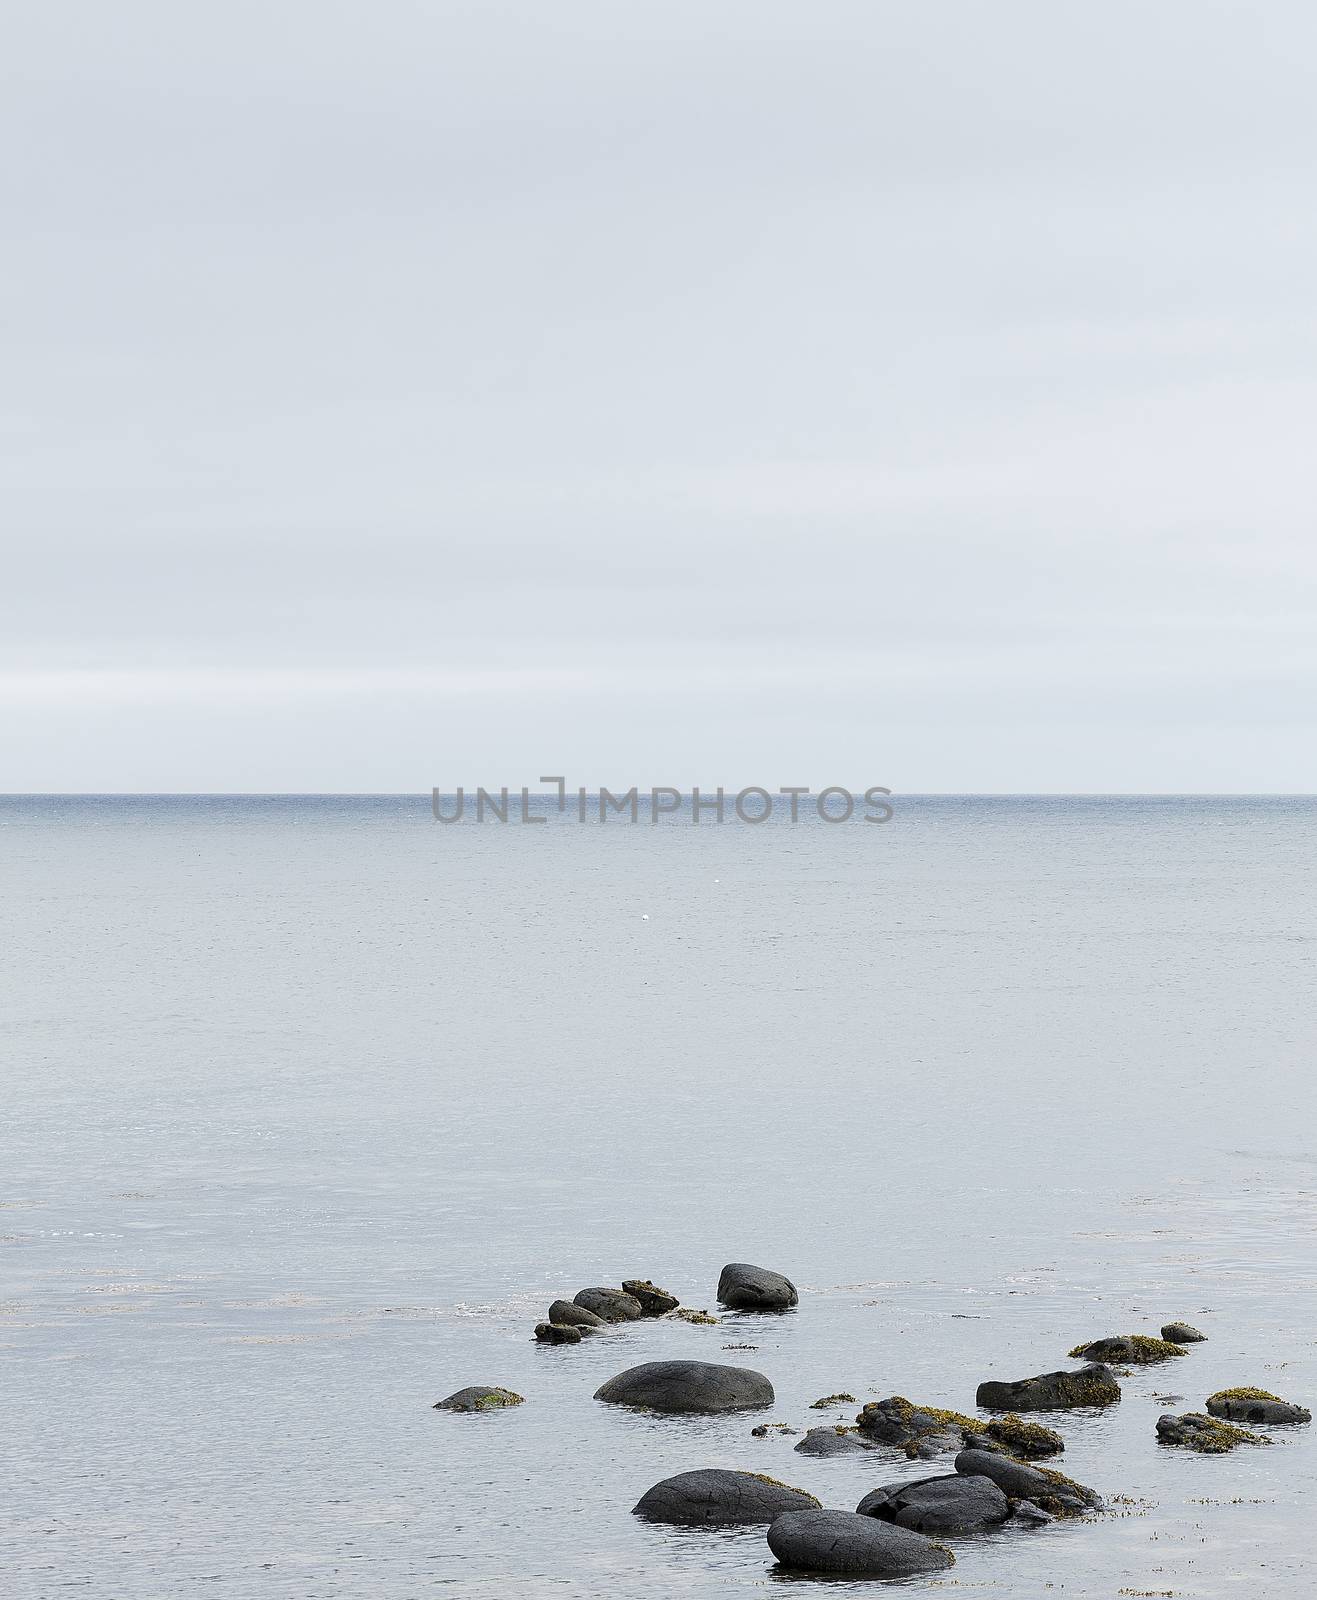 Minimalist image of the Giant's Causeway in Northern Ireland, with rocks in the foreground and the calm sea in the background